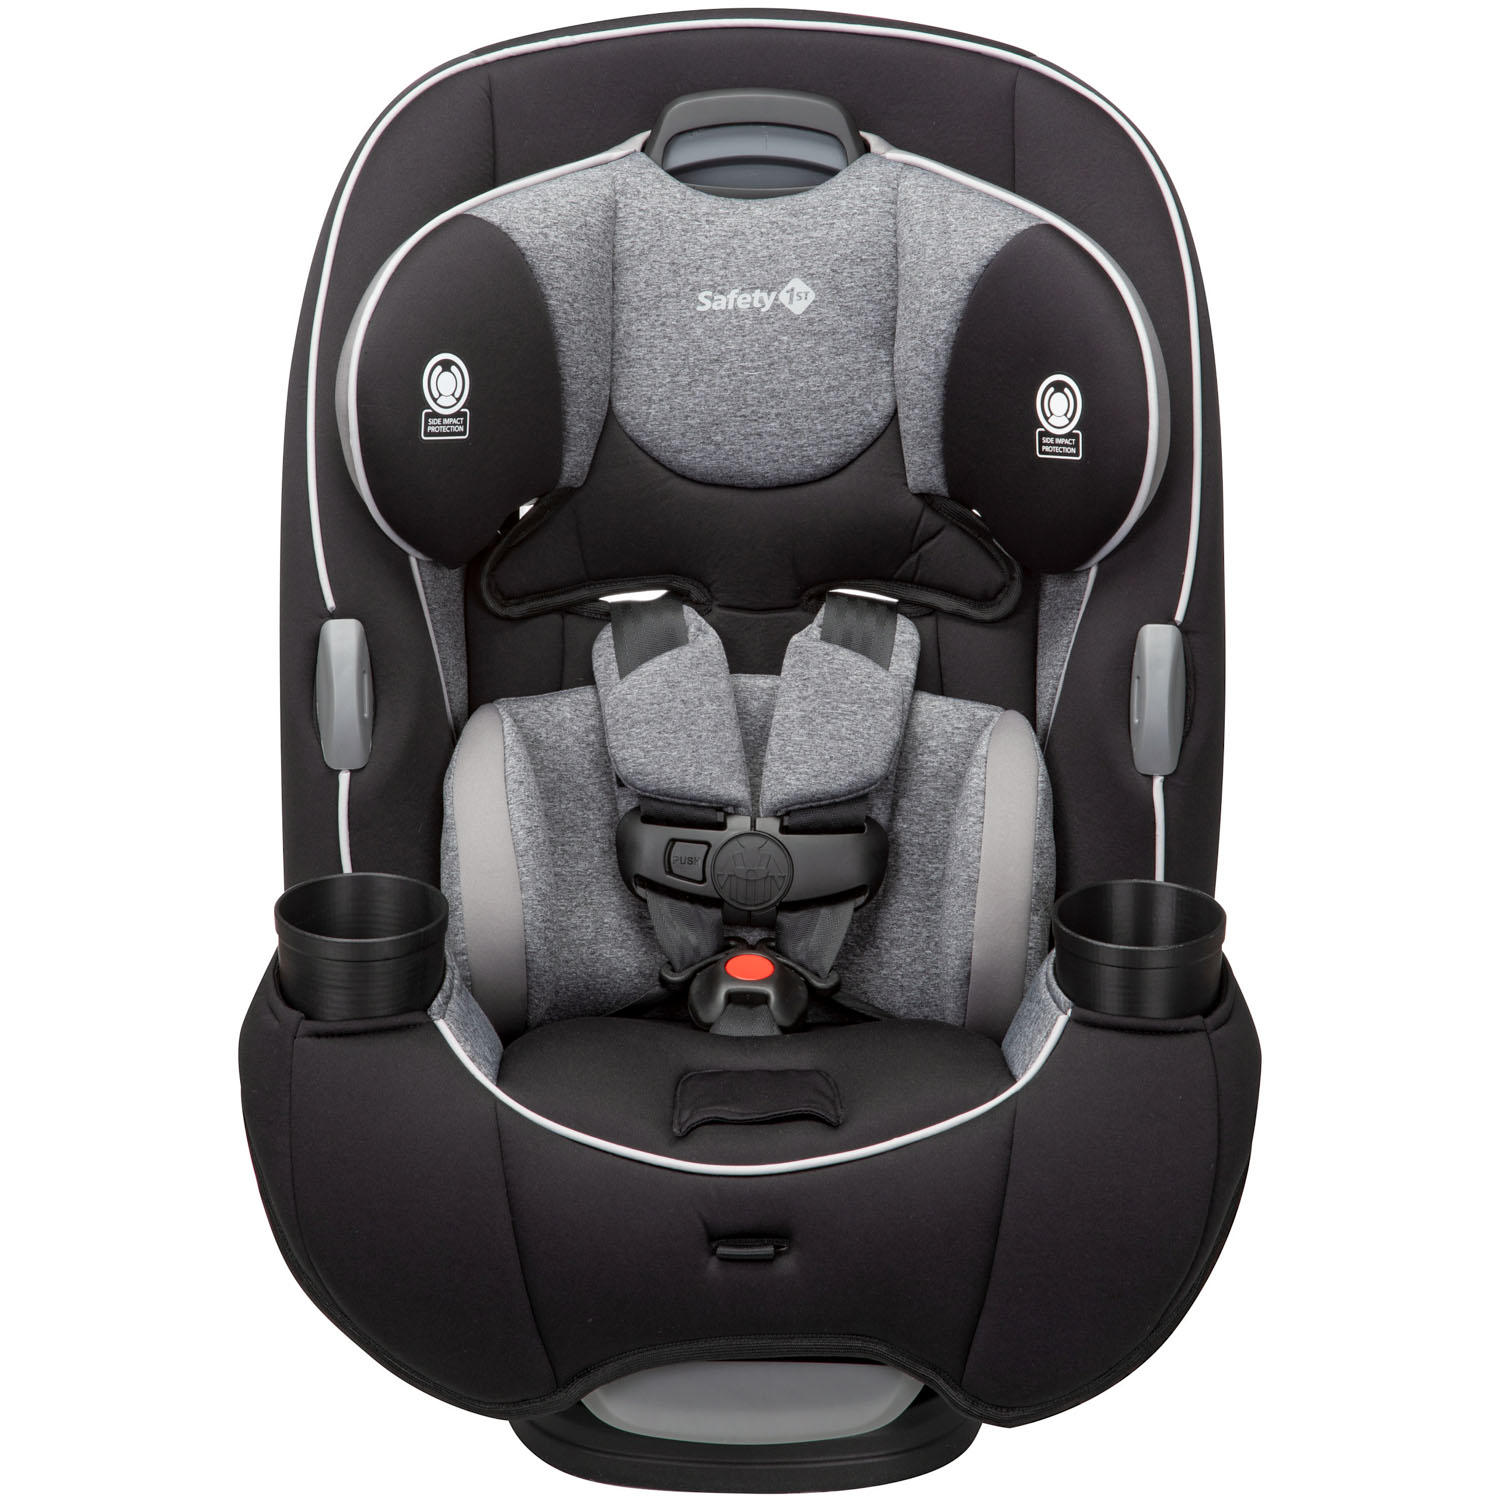 Safety 1st EverFit All-in-One Car Seat (Eclipse Black)